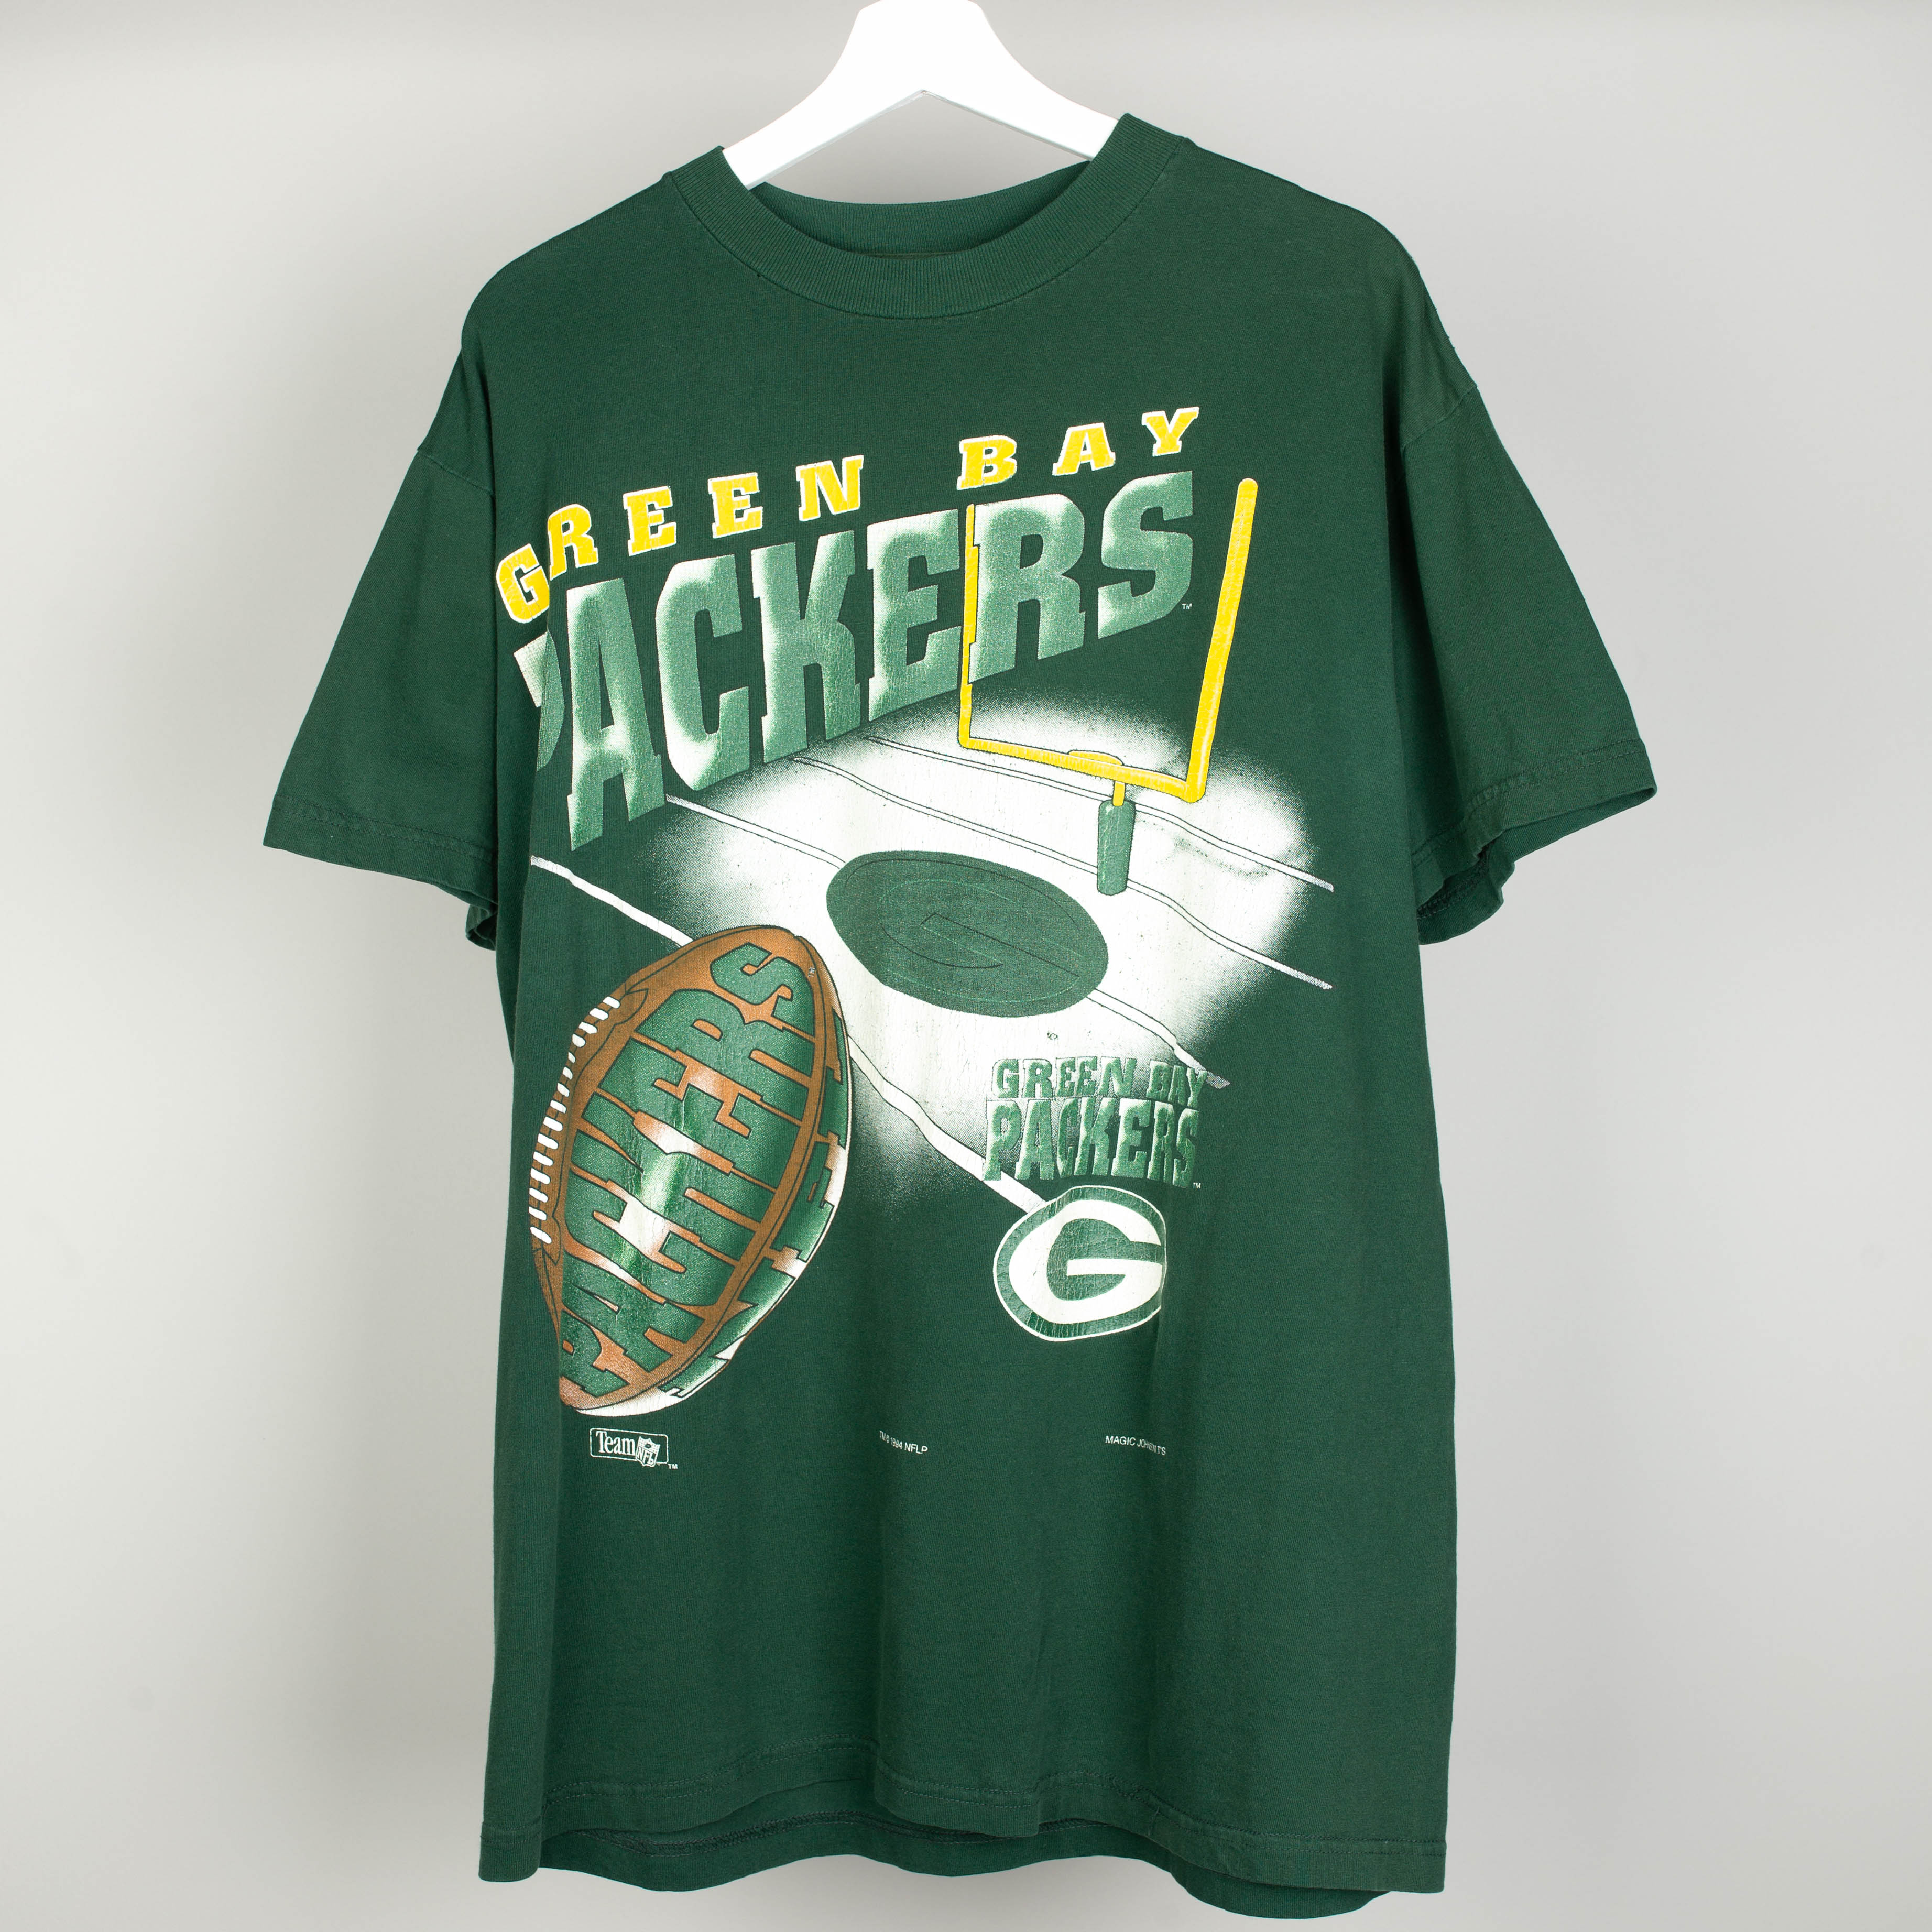 1994 Green Bay Packers T-Shirt Size L